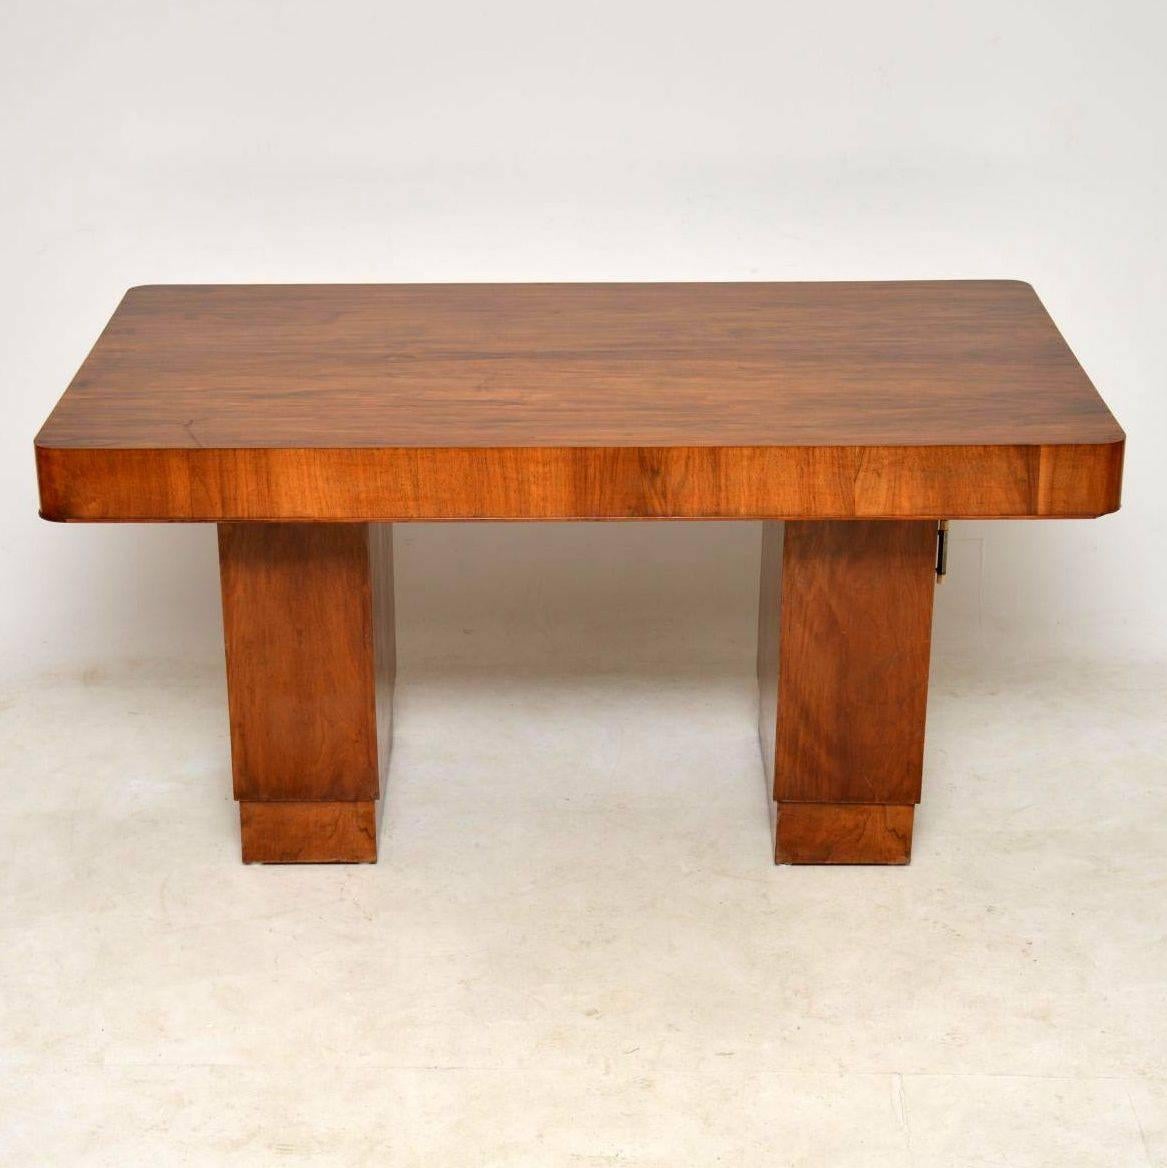 A beautiful original Art Deco vintage dining table in walnut, this dates from around the 1920s-1930s. The condition is excellent for its age; there is just some extremely minor wear here and there. This has a lovely polished finish; there is just